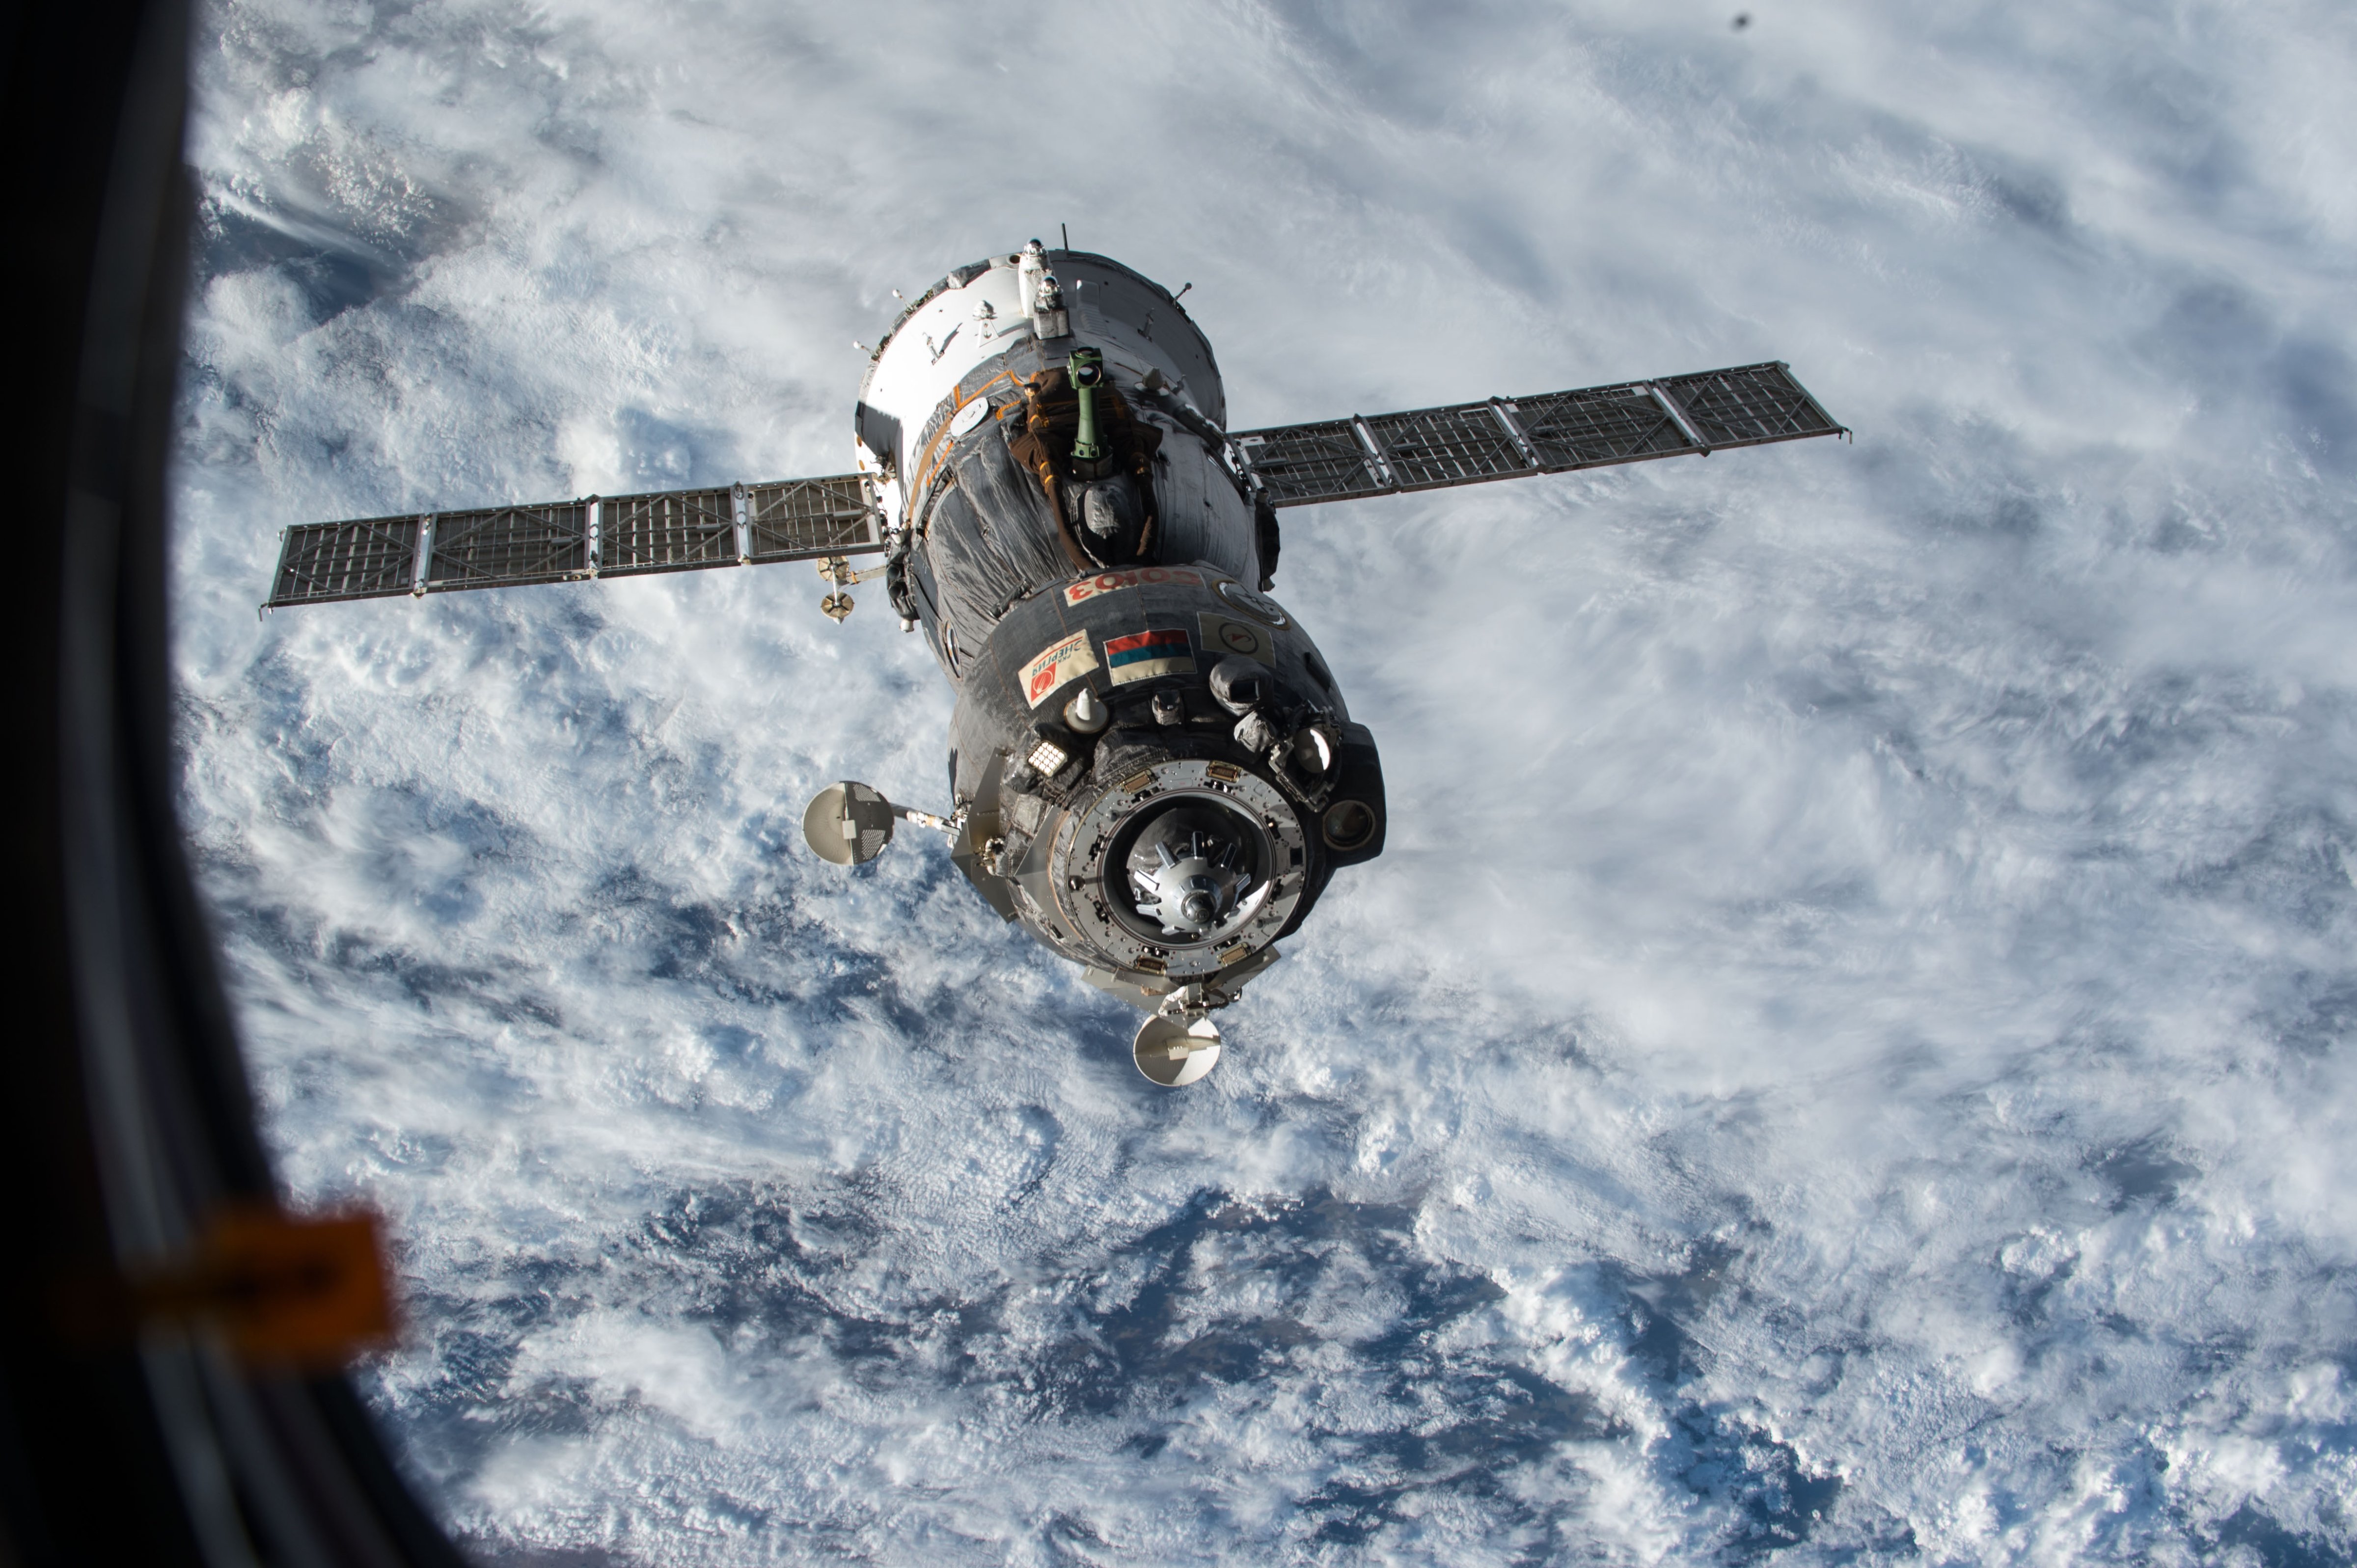 Need a lift? A Souyz spacecraft after undocking from the space station on June 11, 2015